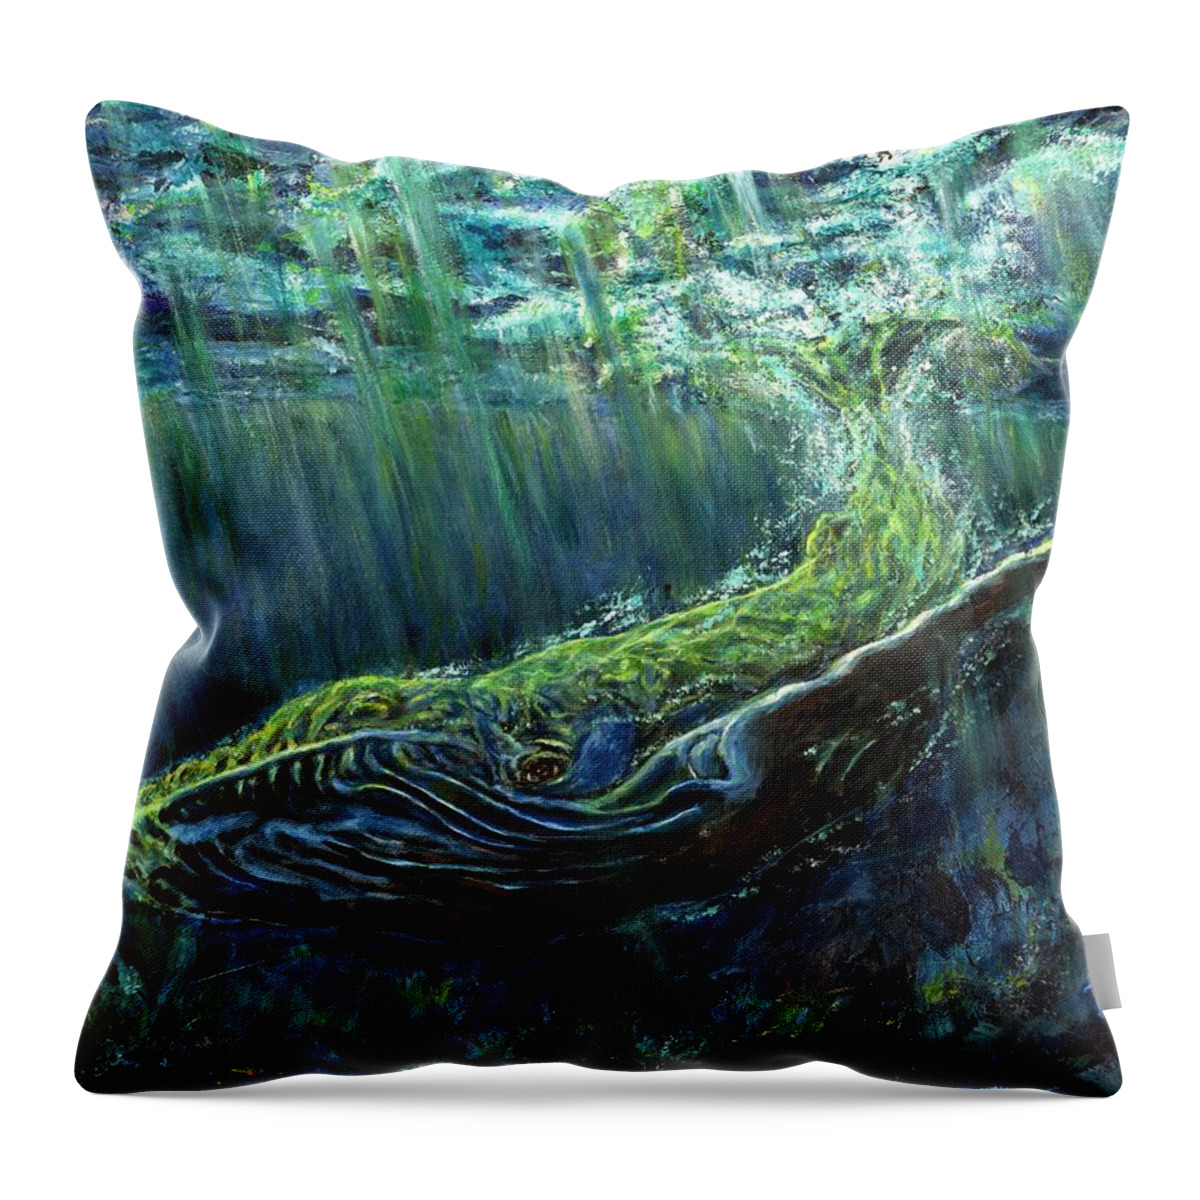 Humpback Whale Throw Pillow featuring the painting Humpback Whale by John Bohn